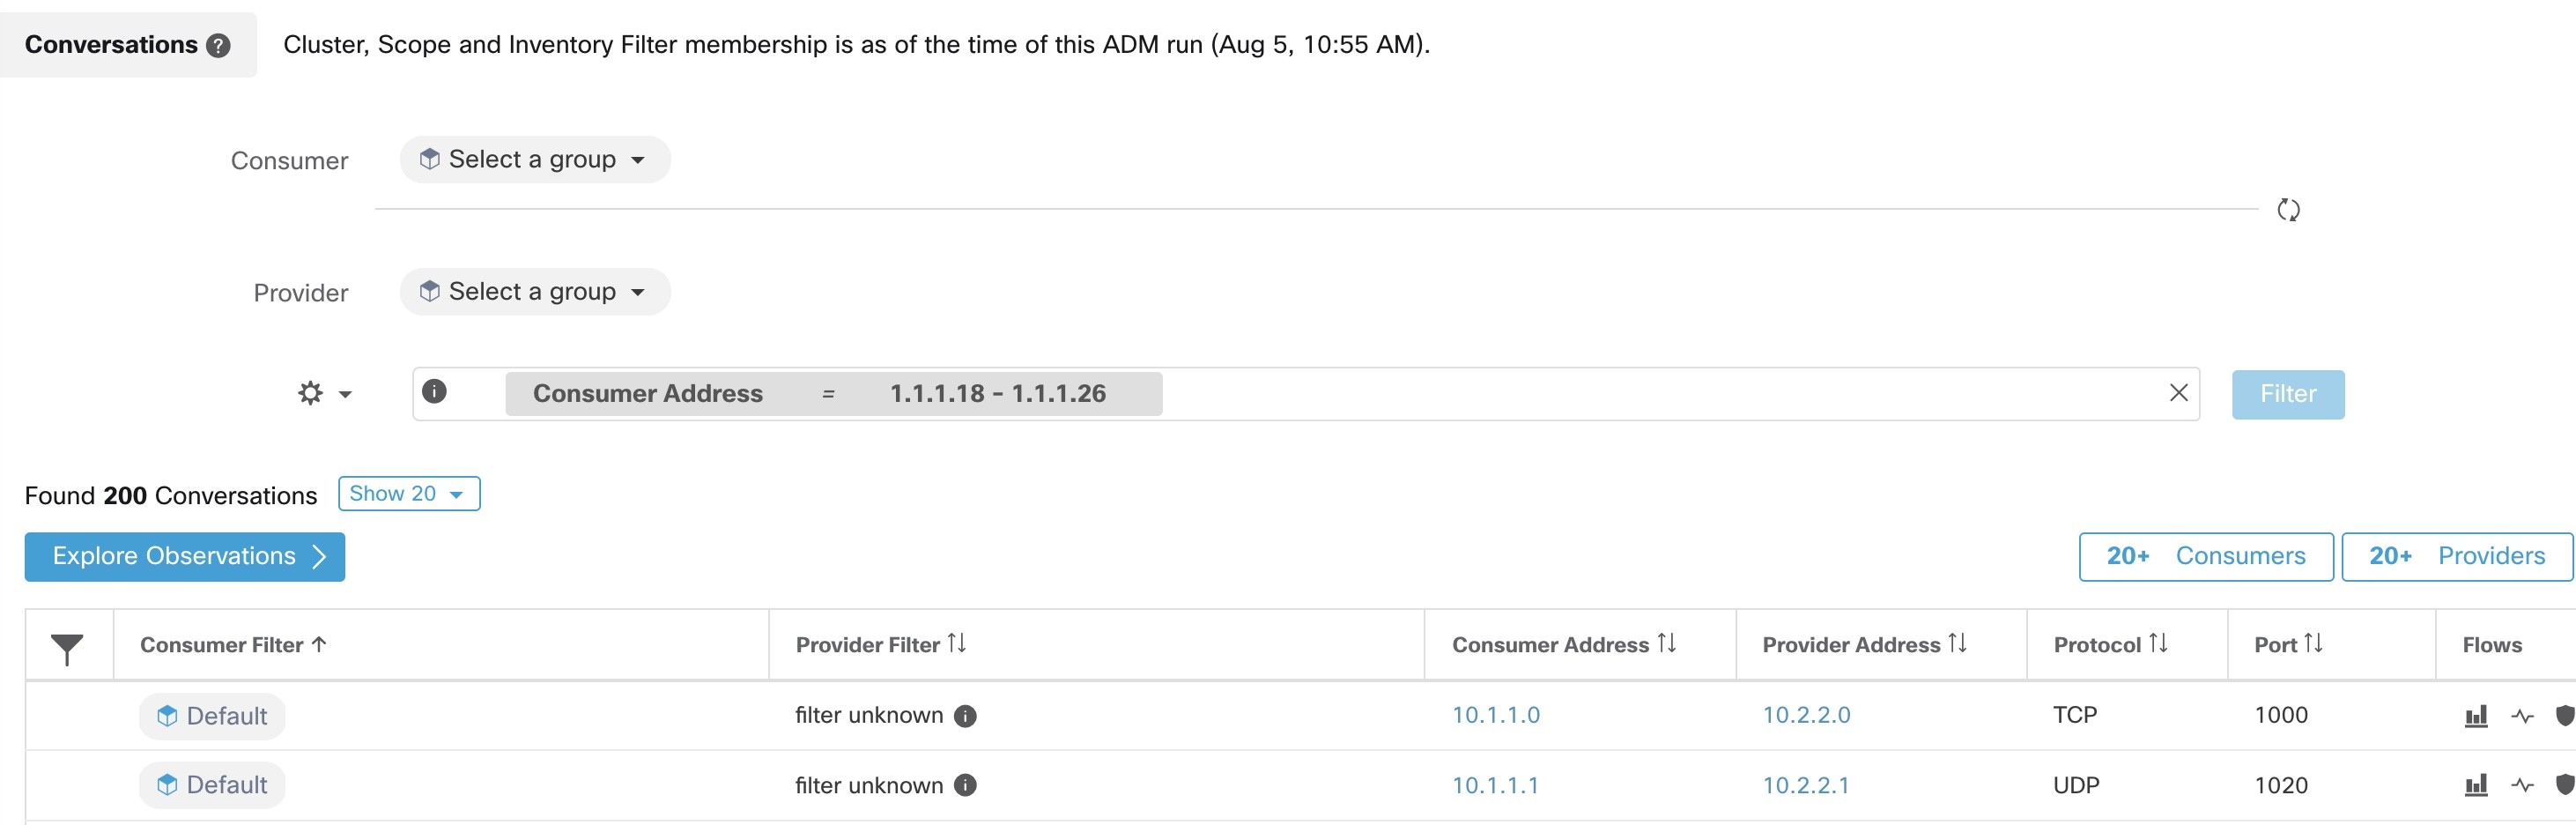 Filter input supports range query for Consumer Address